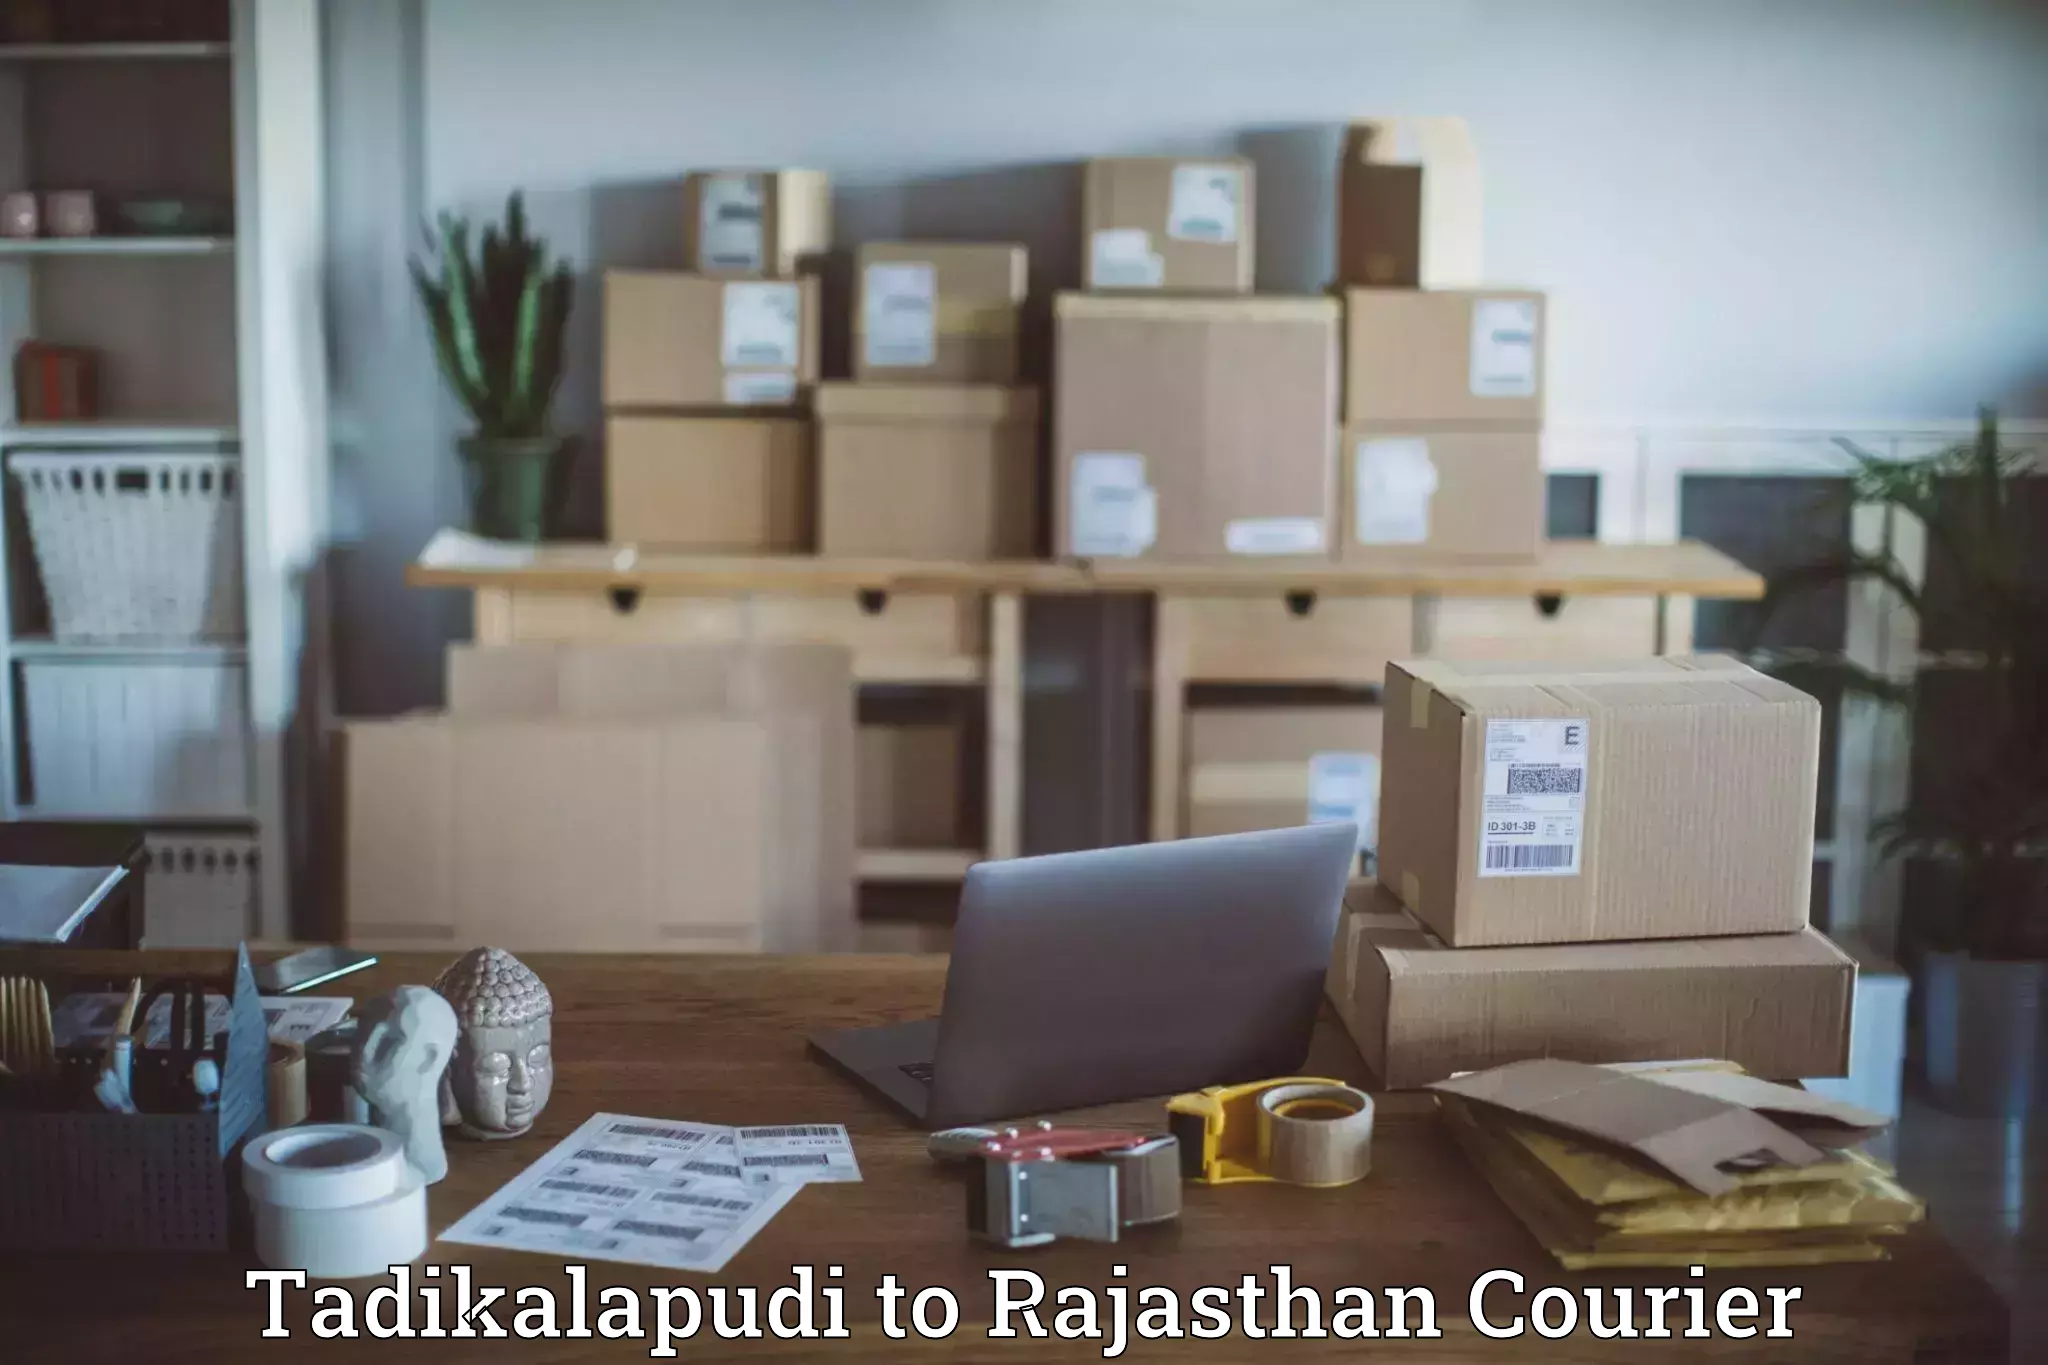 Same-day delivery solutions Tadikalapudi to Yeswanthapur